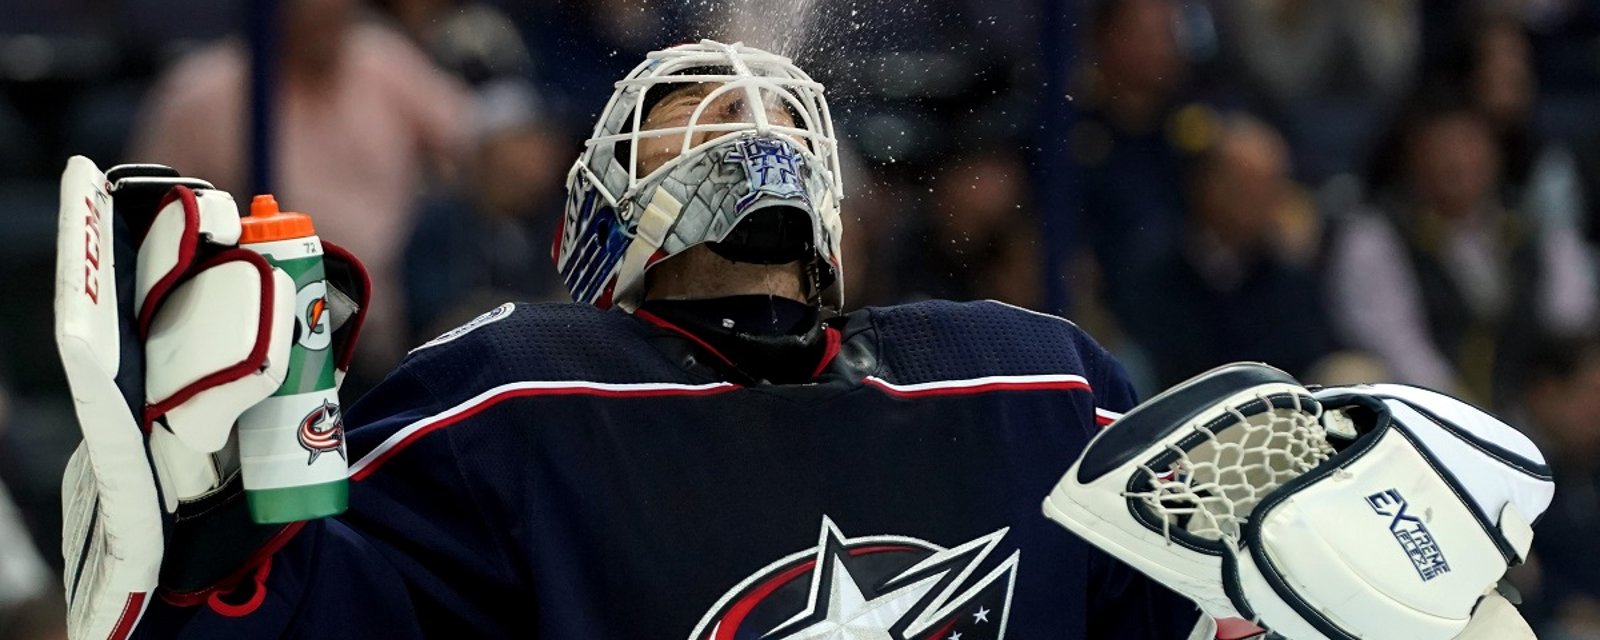 Team going all in for Bobrovsky trade, plan to sign him for 8 more years.